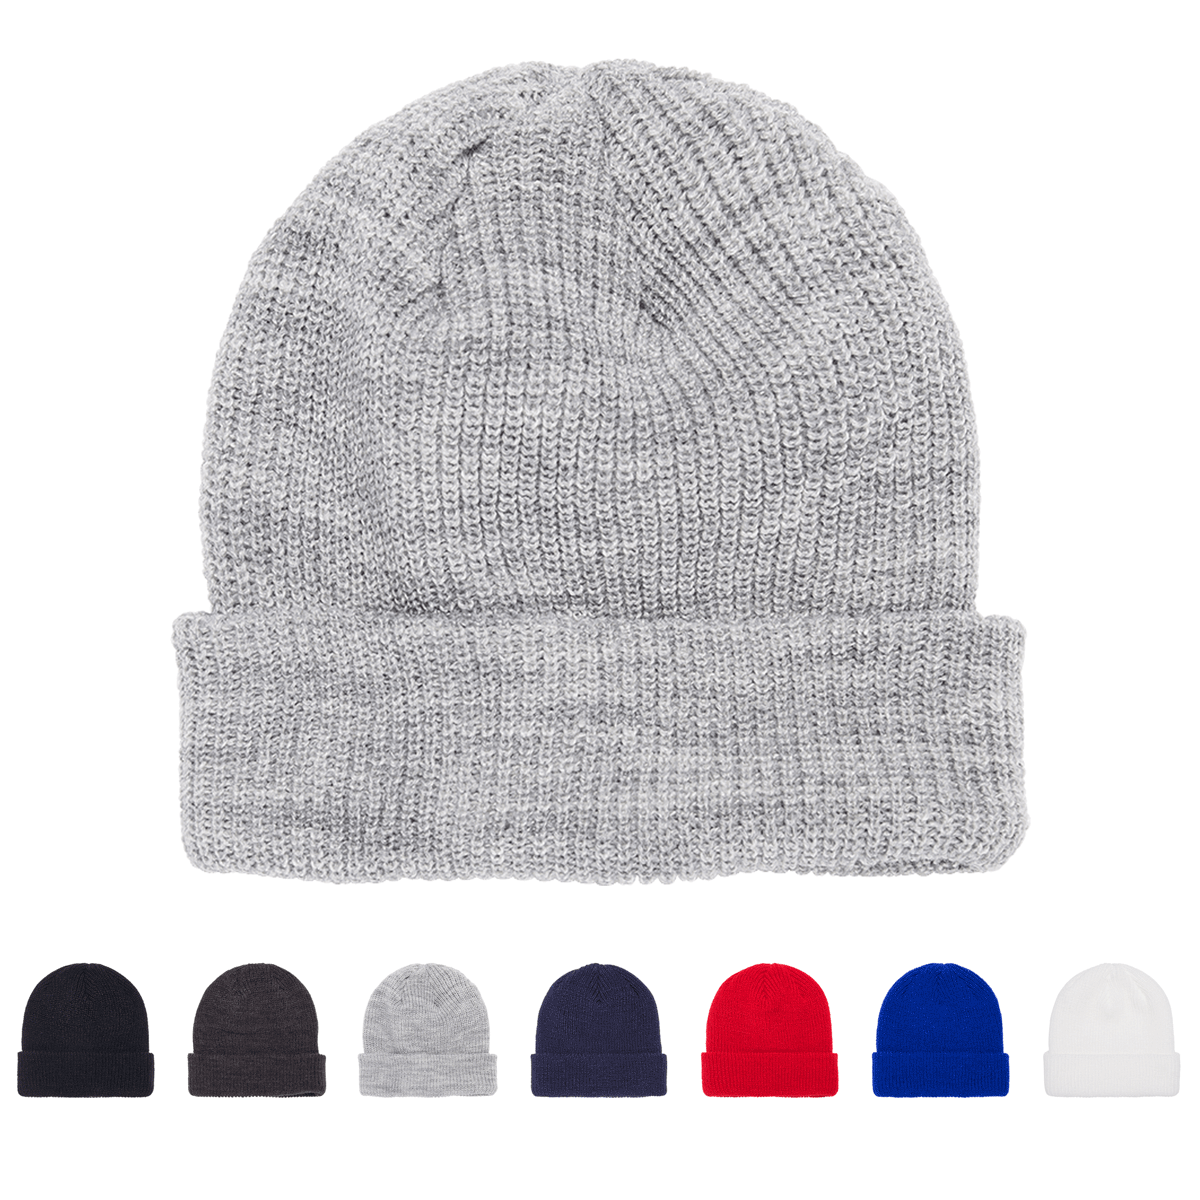 The Yupoong – Wholesale - Park Knit Knit Cap Beanie, 1545K YP Ribbed Classics® Cuffed 1545K